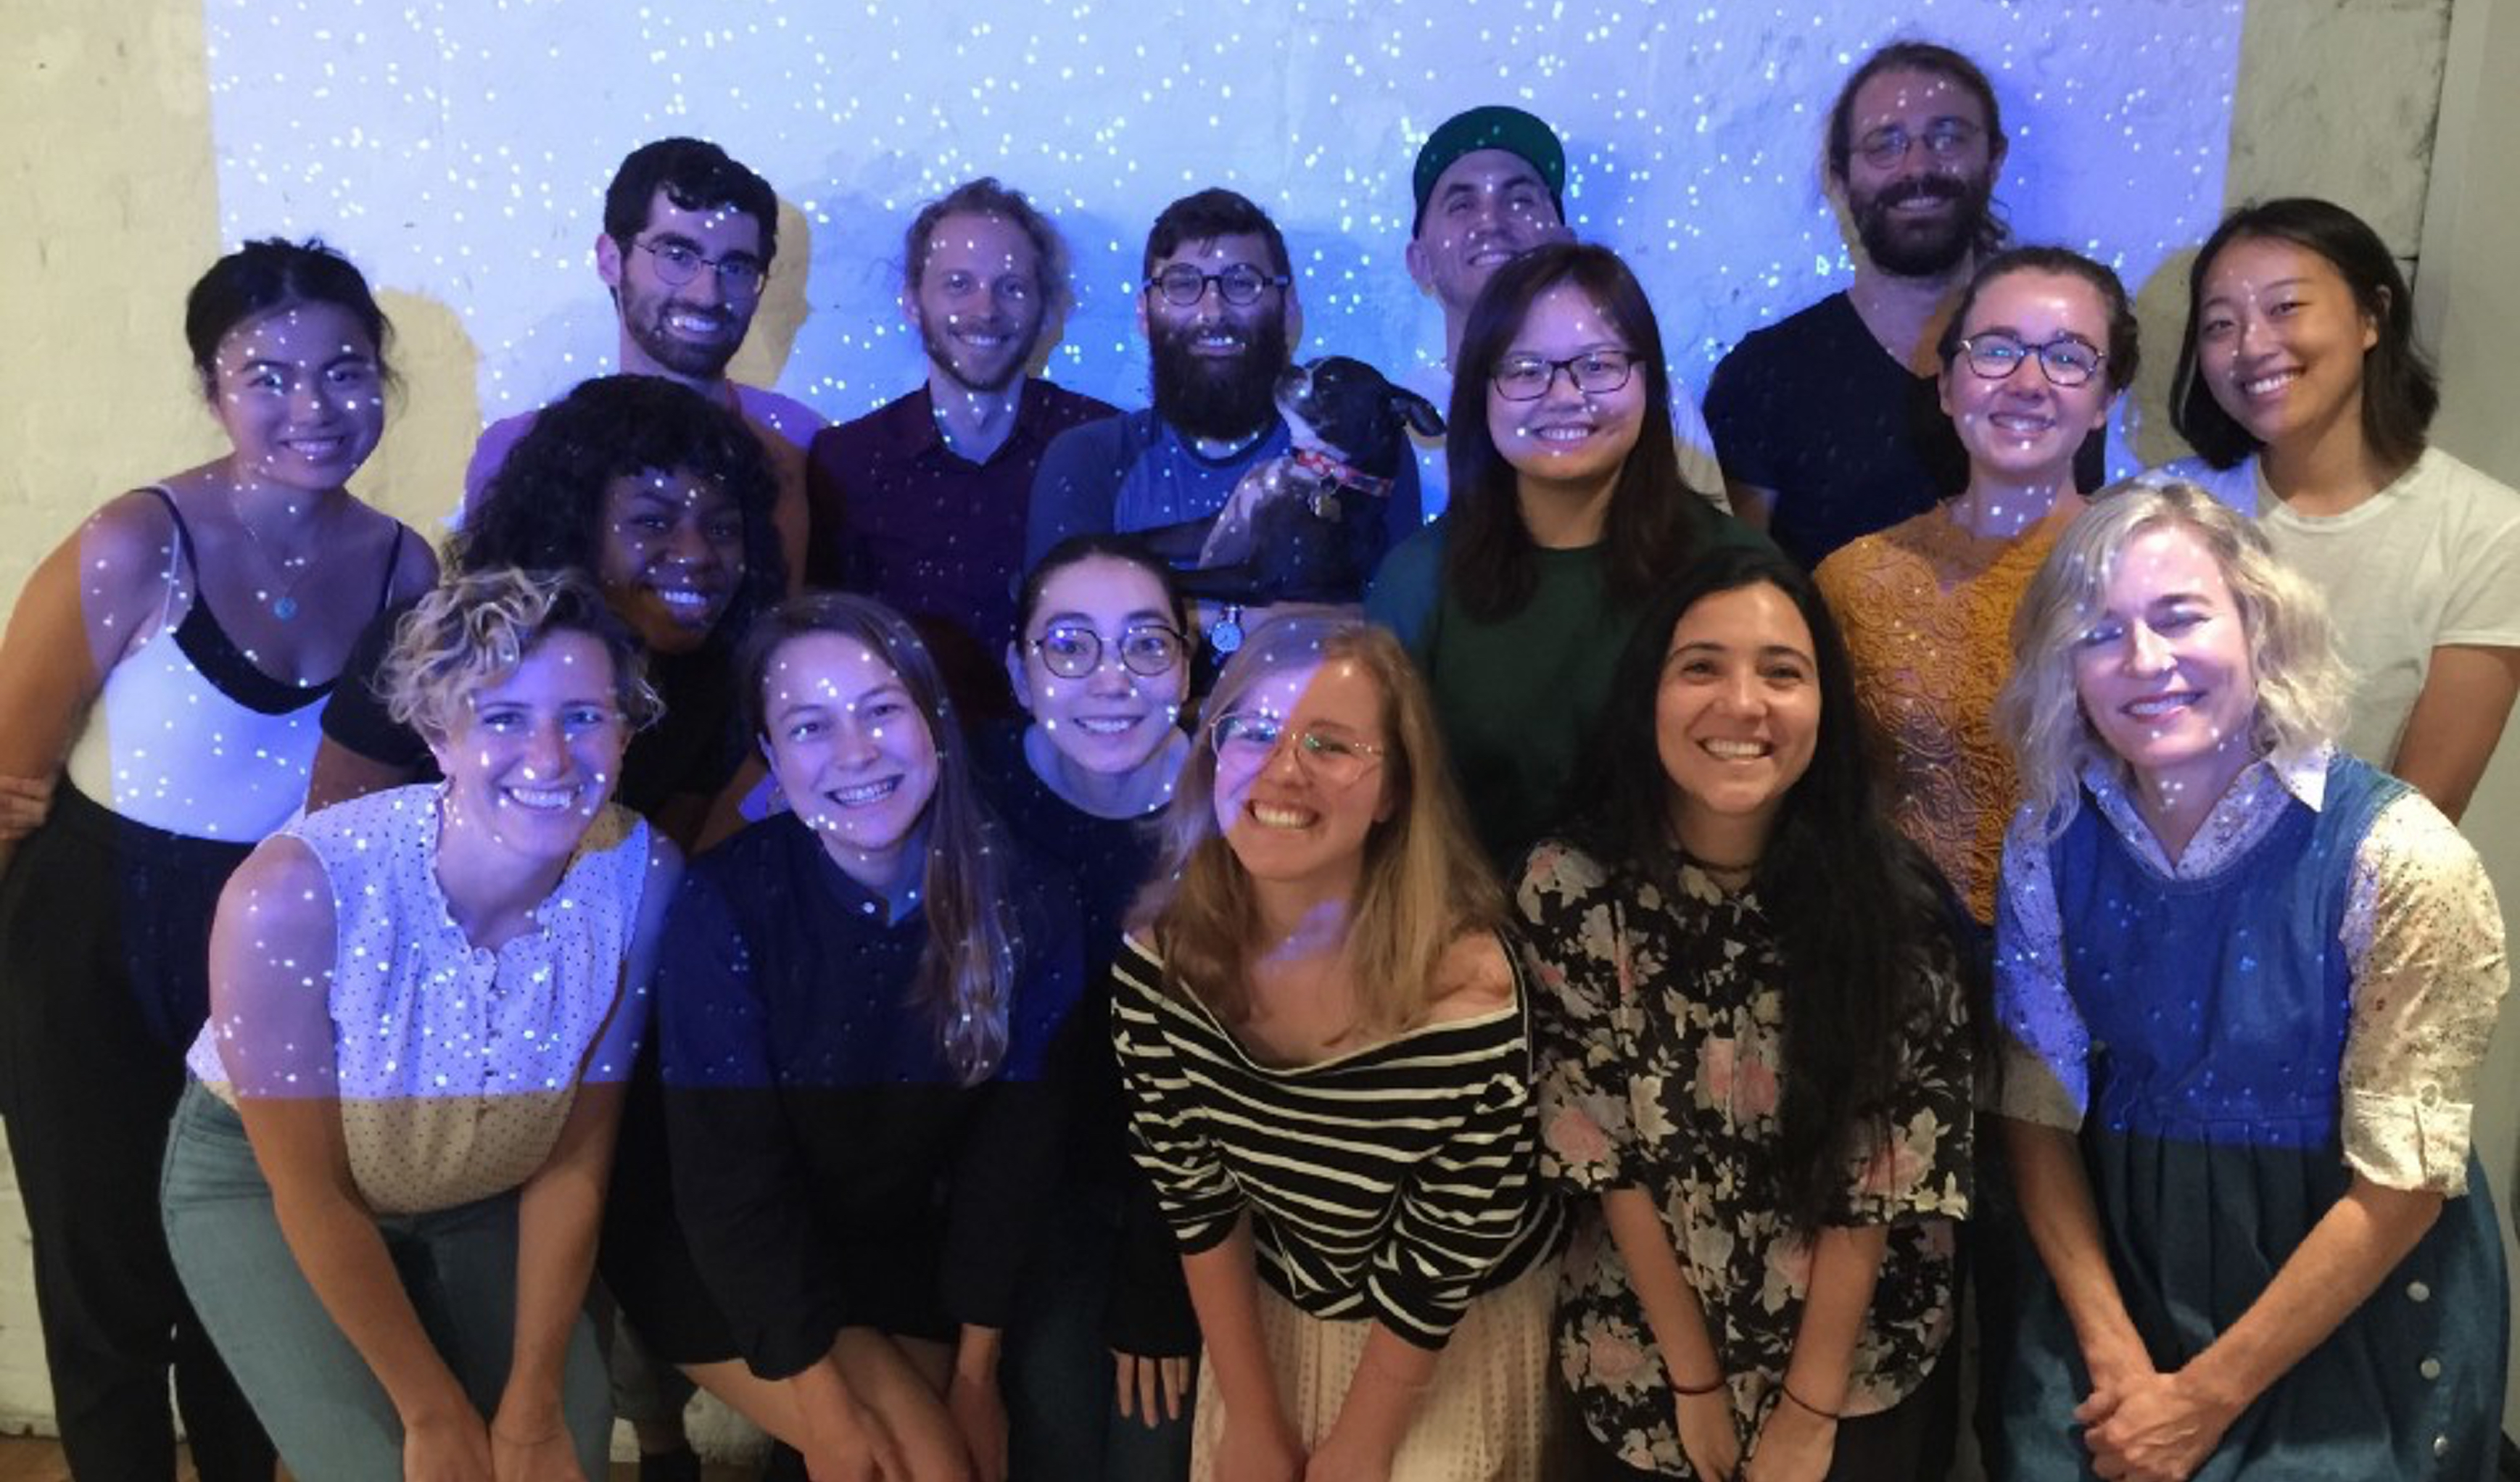 a group sfpc creative coding bootcamp photo, with projected stars on top